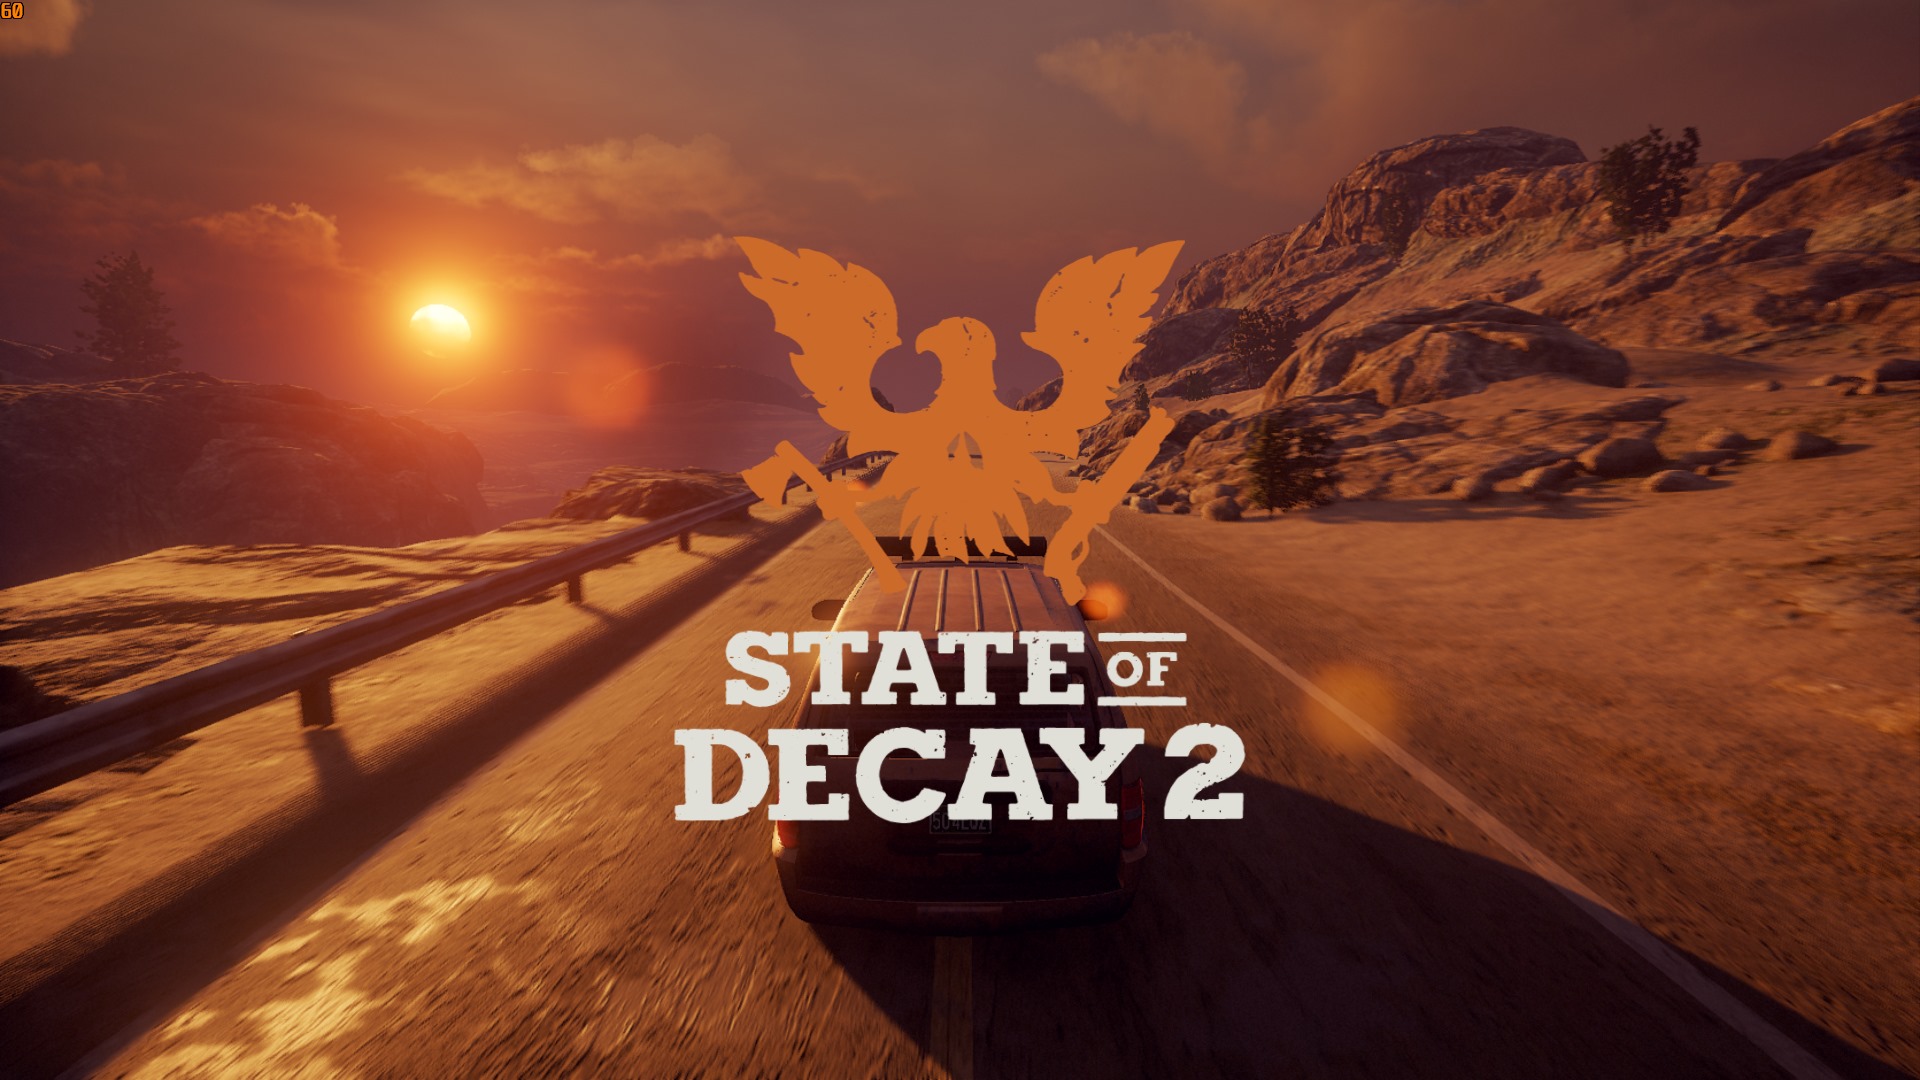 State of Decay 2 is Getting Major Updates, Five Years Later